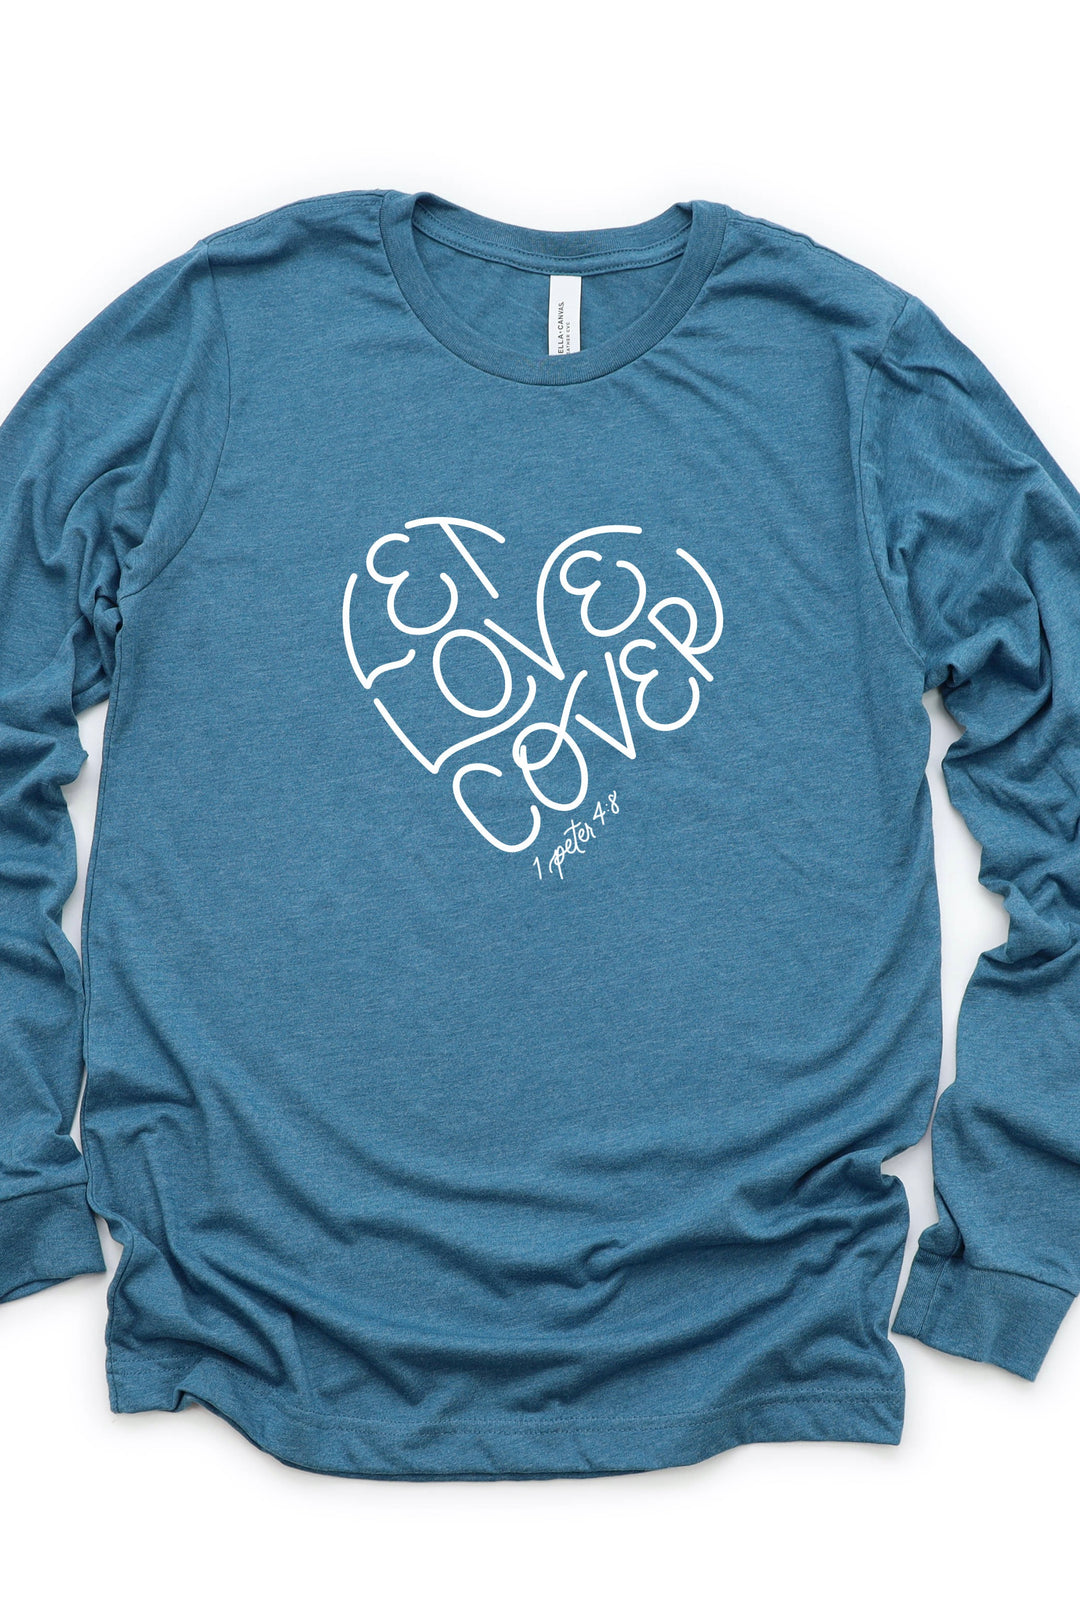 "Let Love Cover" Long Sleeve Tee